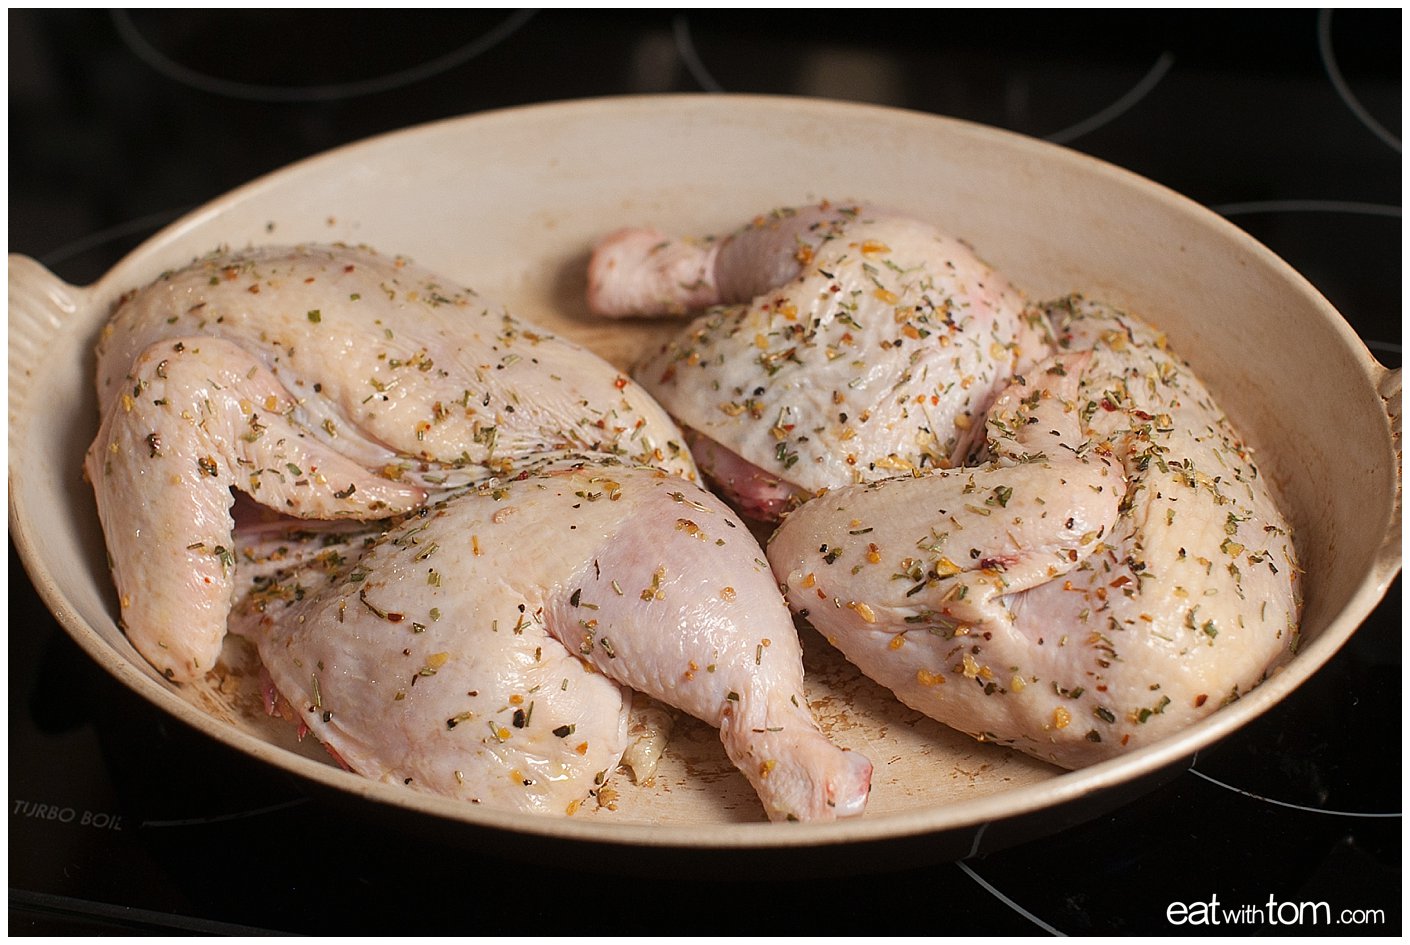 Dating advice for men in their 20s, cook a chicken